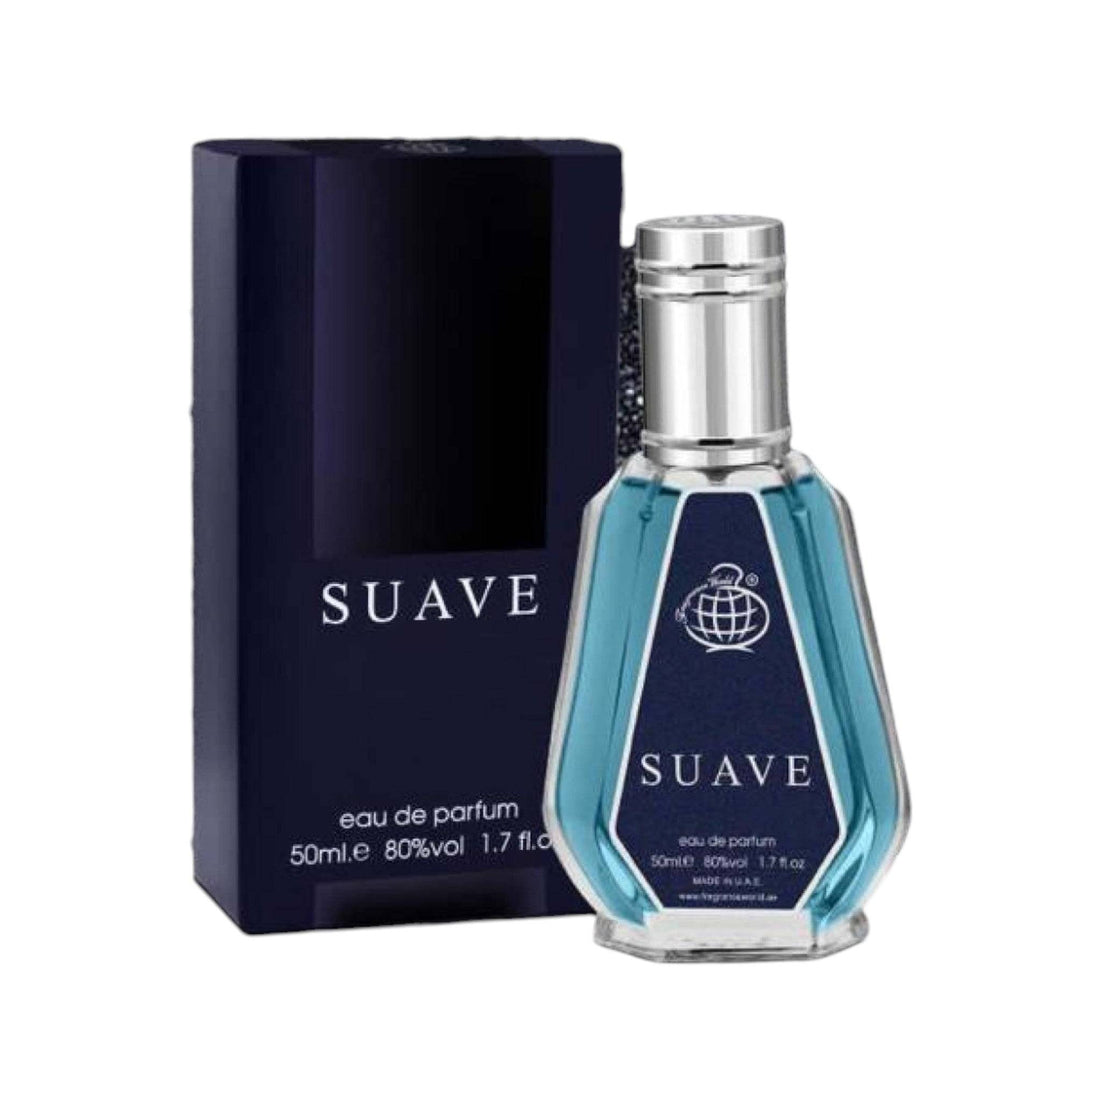 Elegant bottle of Suave Eau De Parfum by Fragrance World, showcasing its sleek design and the vibrant notes of pepper, bergamot, and a rich woody base.